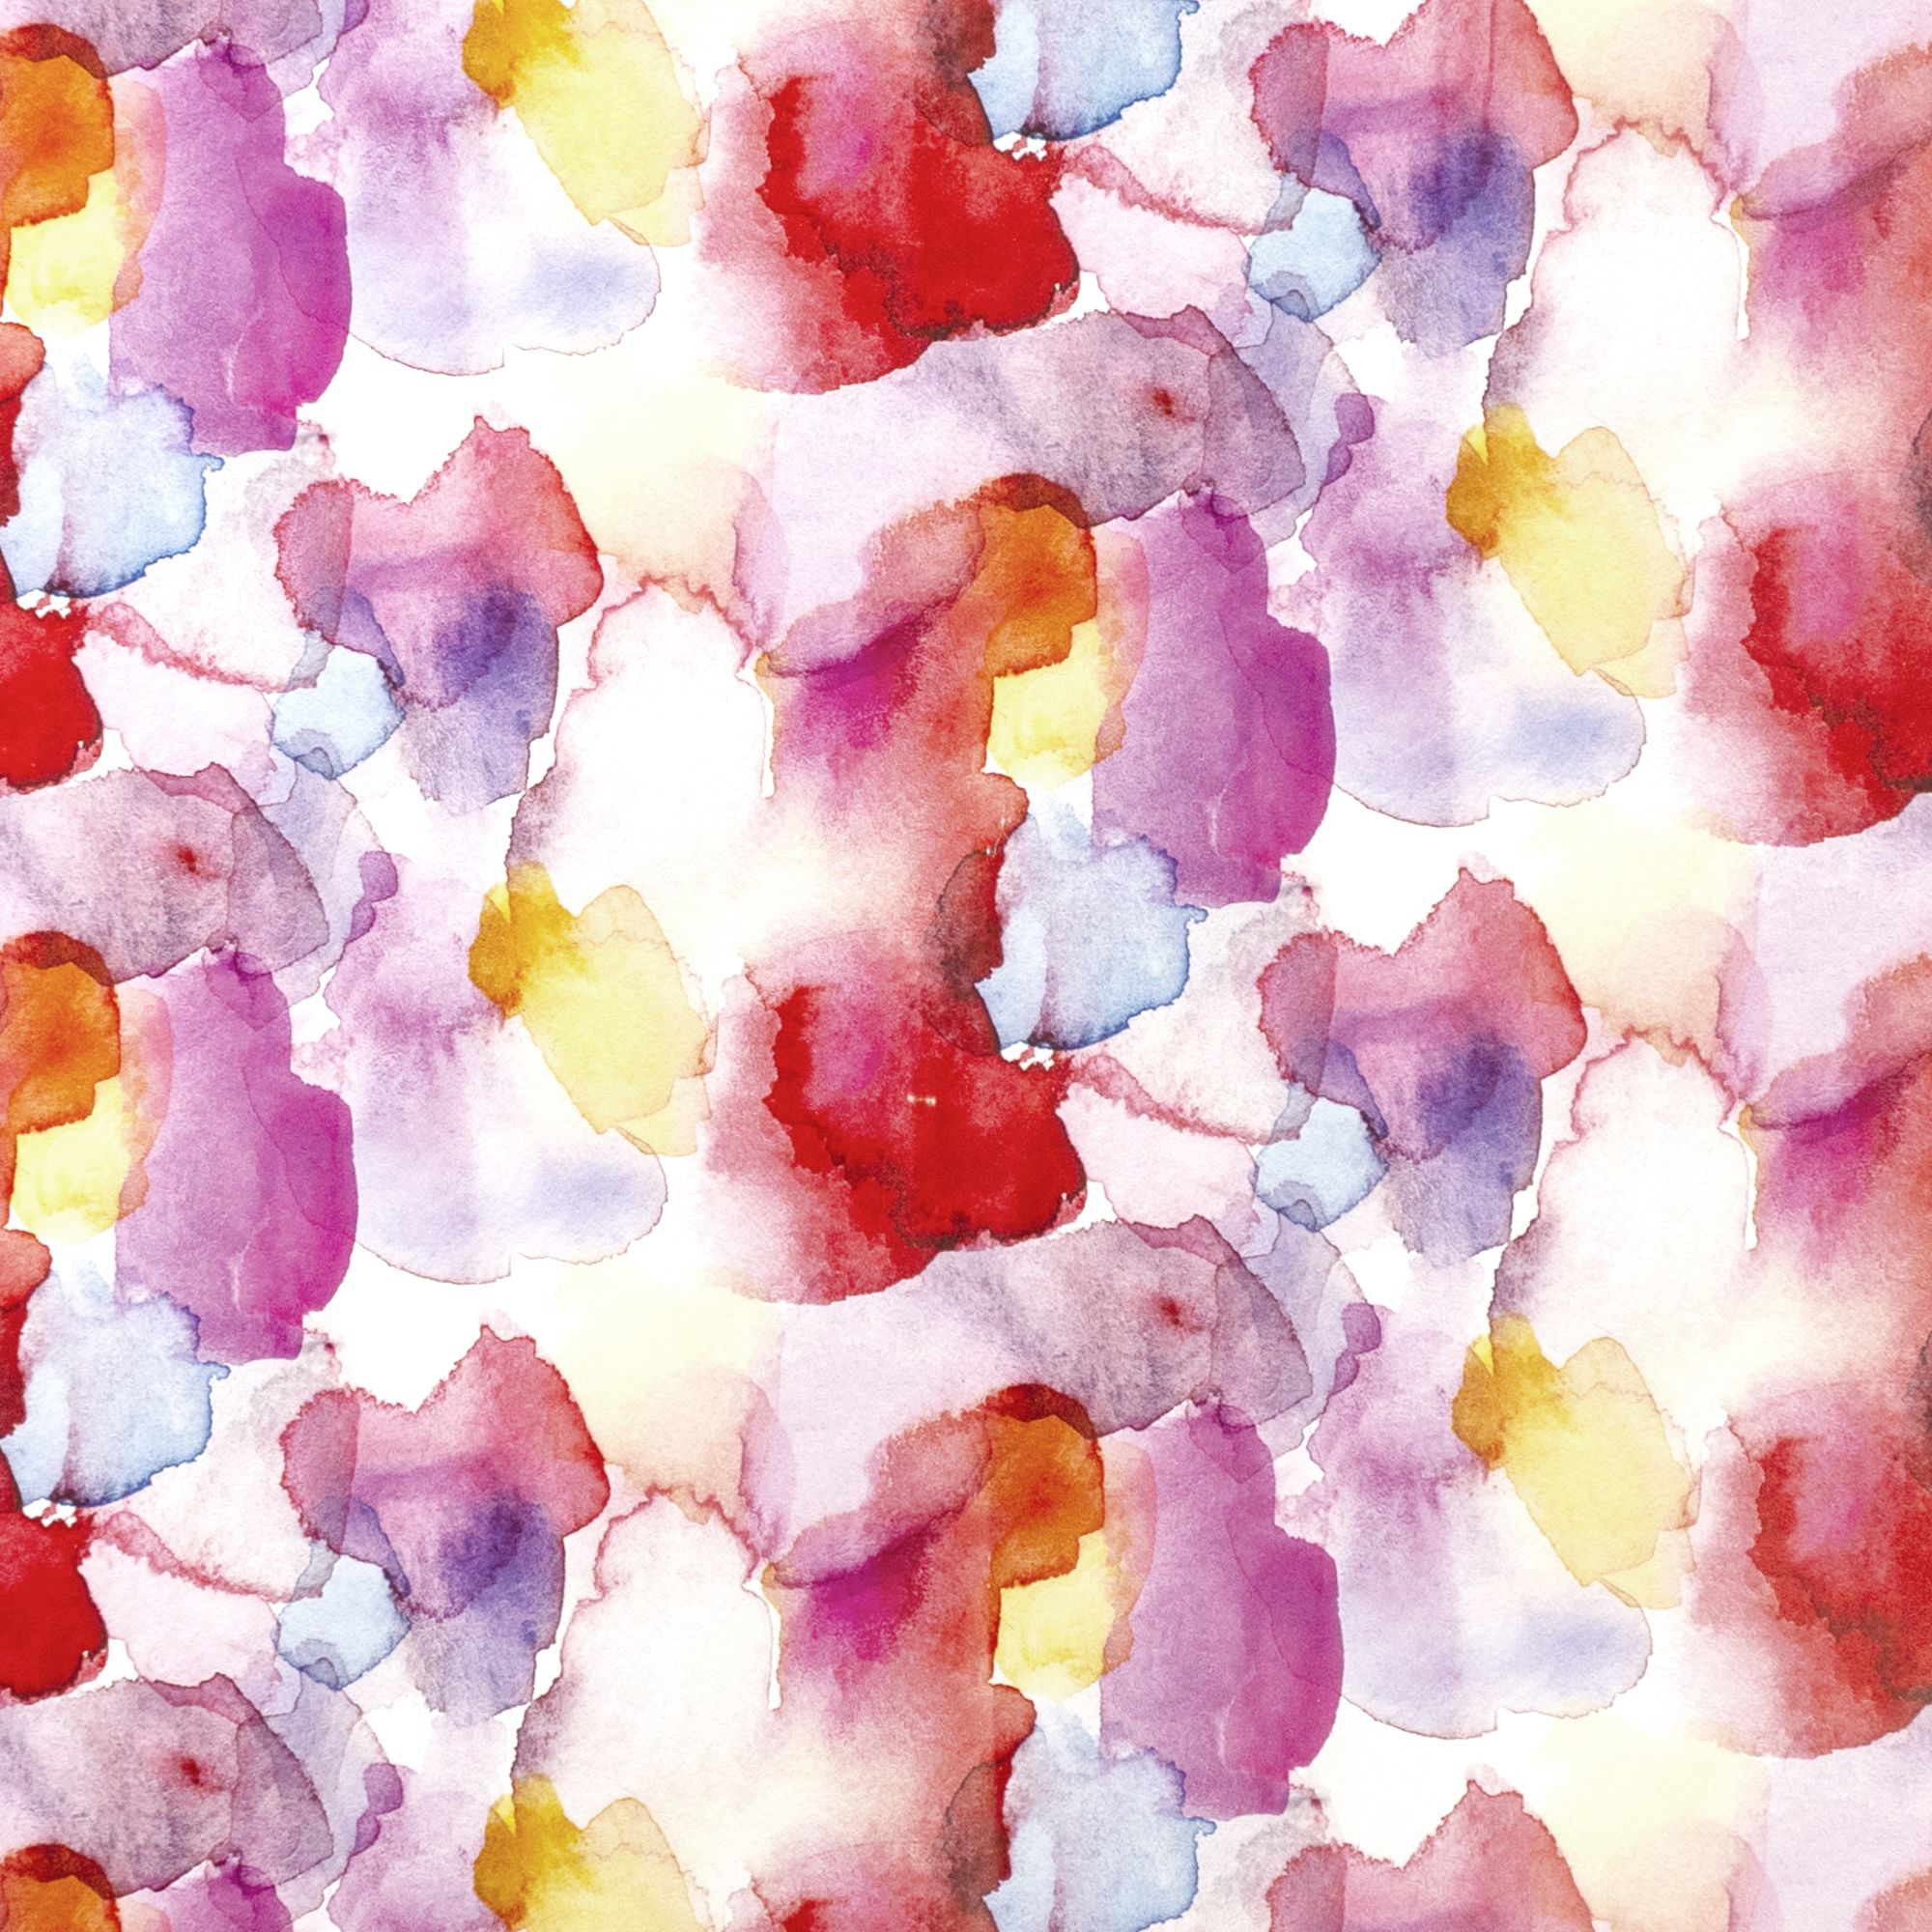 Wrapping Paper - Watercolor Smudge Effect